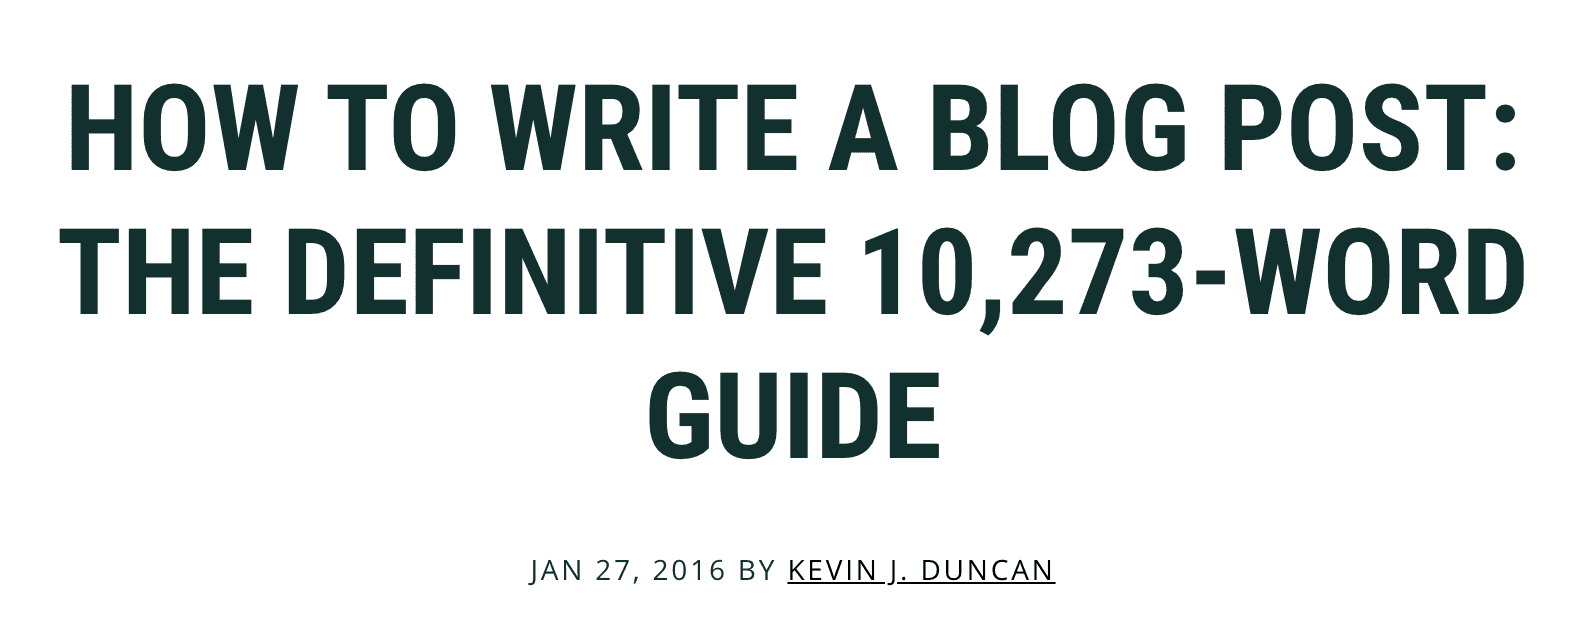 How To Write A Blog Post: The Definitive 10,273-Word Guide